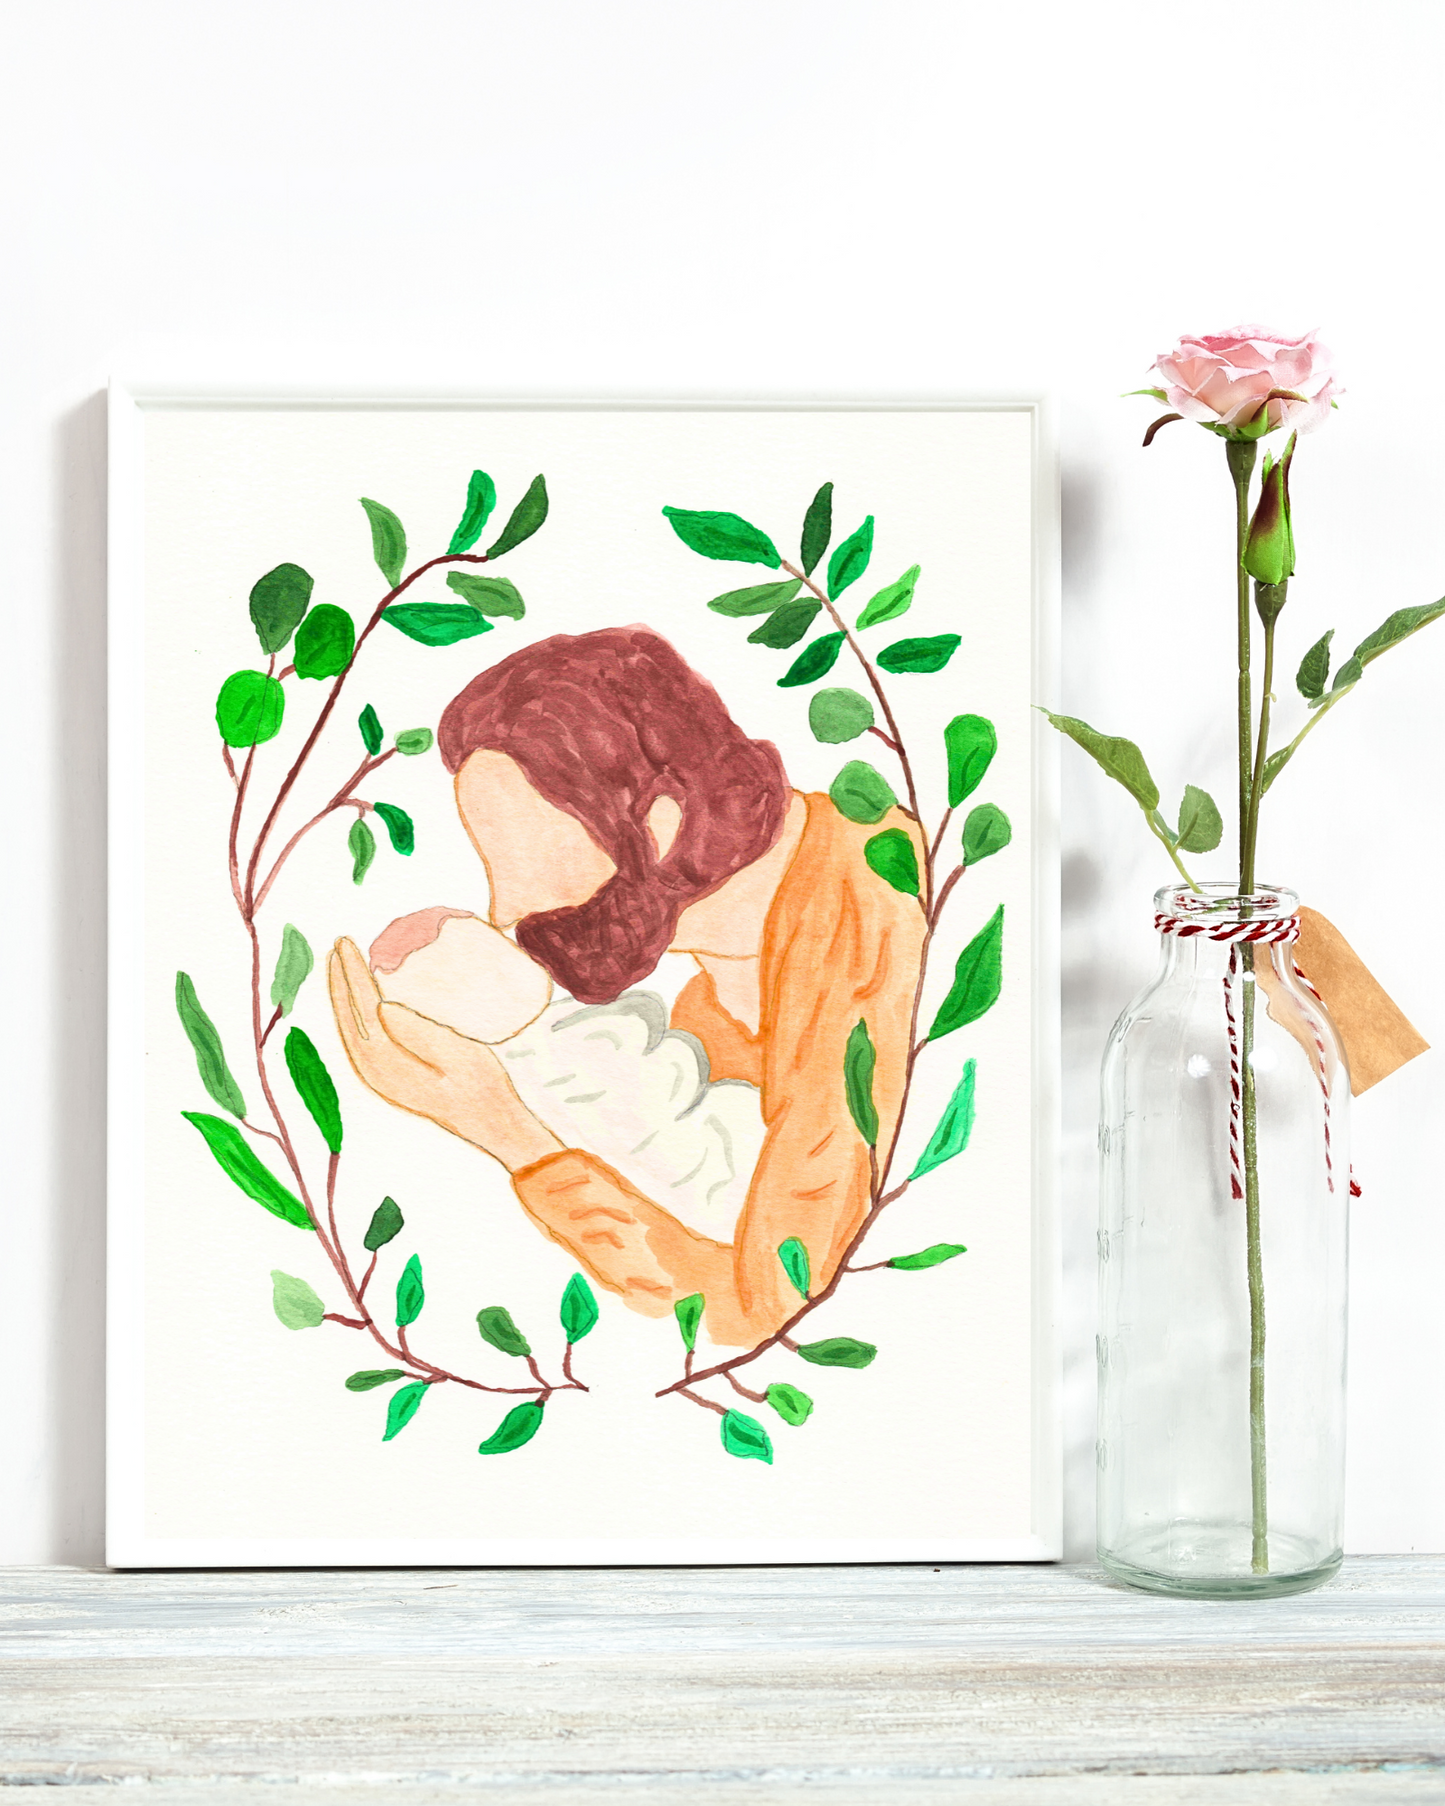 Jesus Christ Kissing Baby miscarriage print